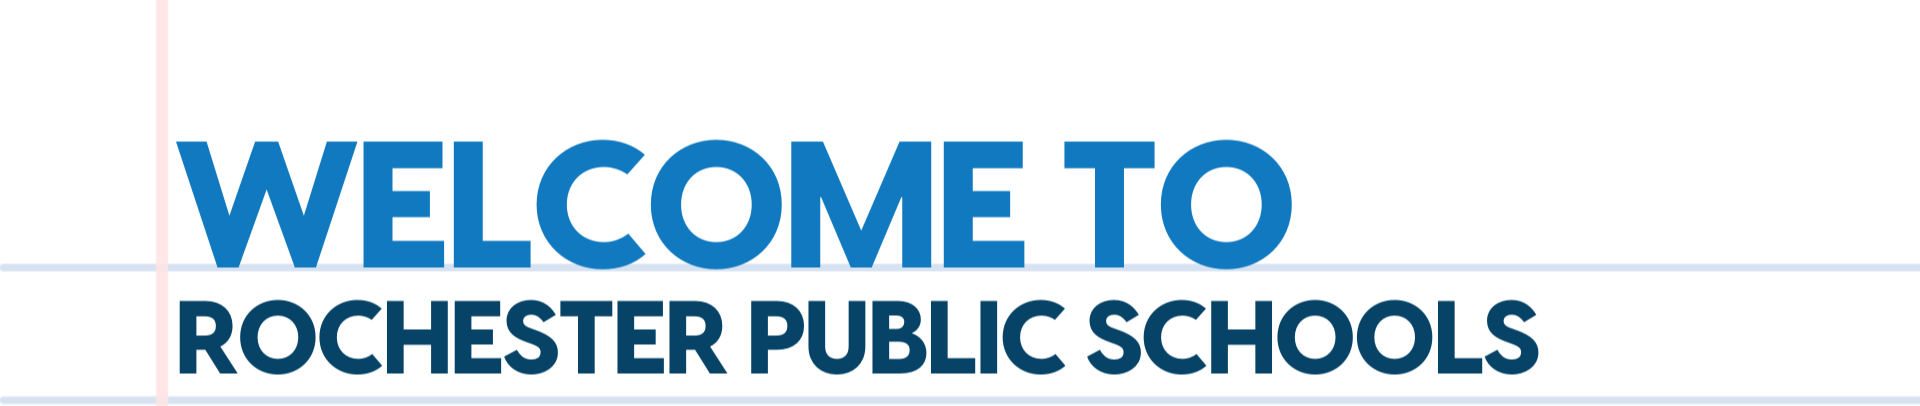 Welcome to Rochester Public Schools Header Graphic